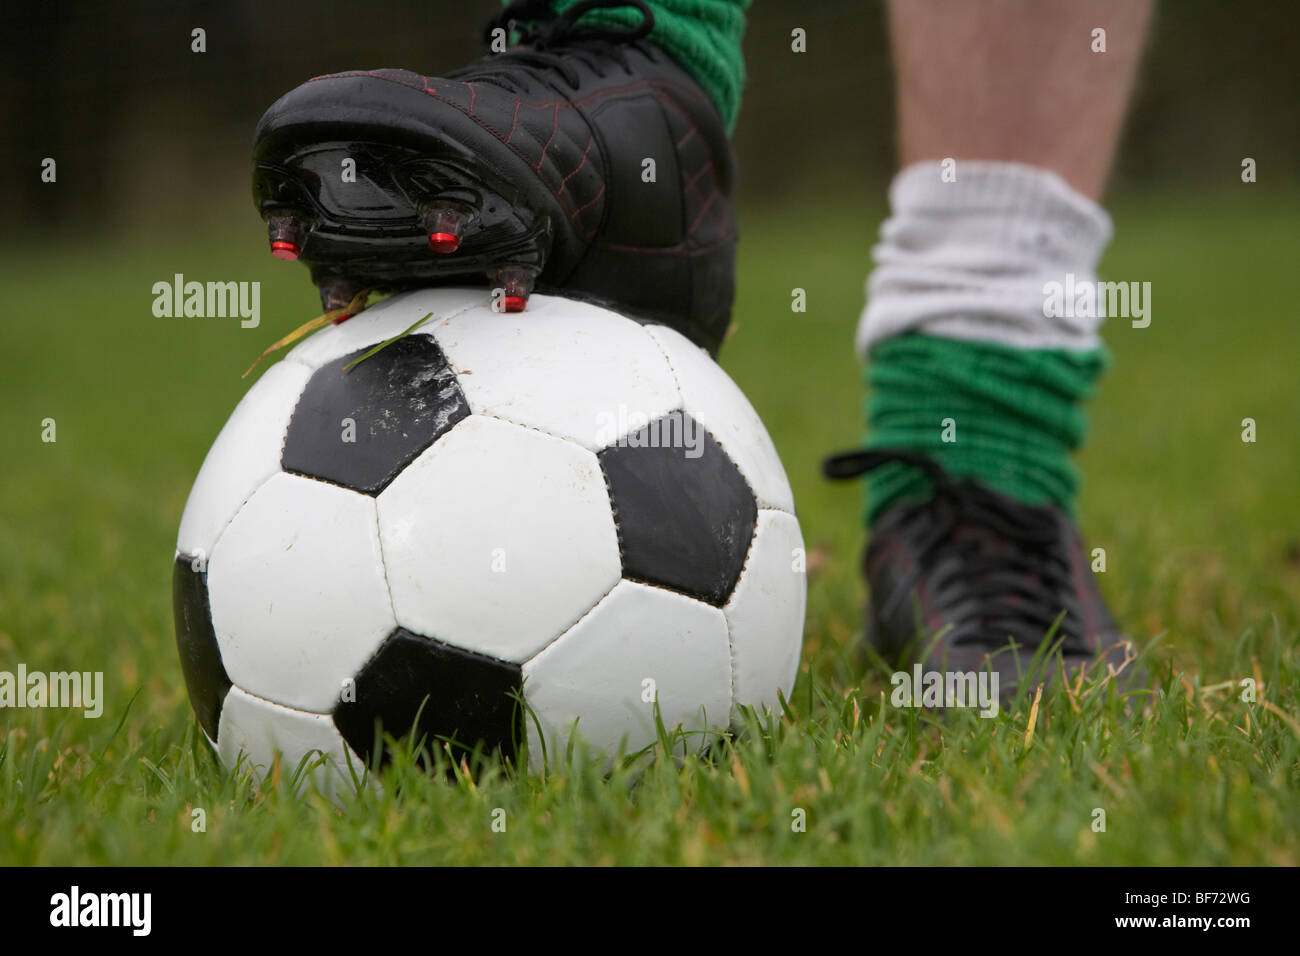 soccer football player with foot on the ball ready to take a kick Stock Photo